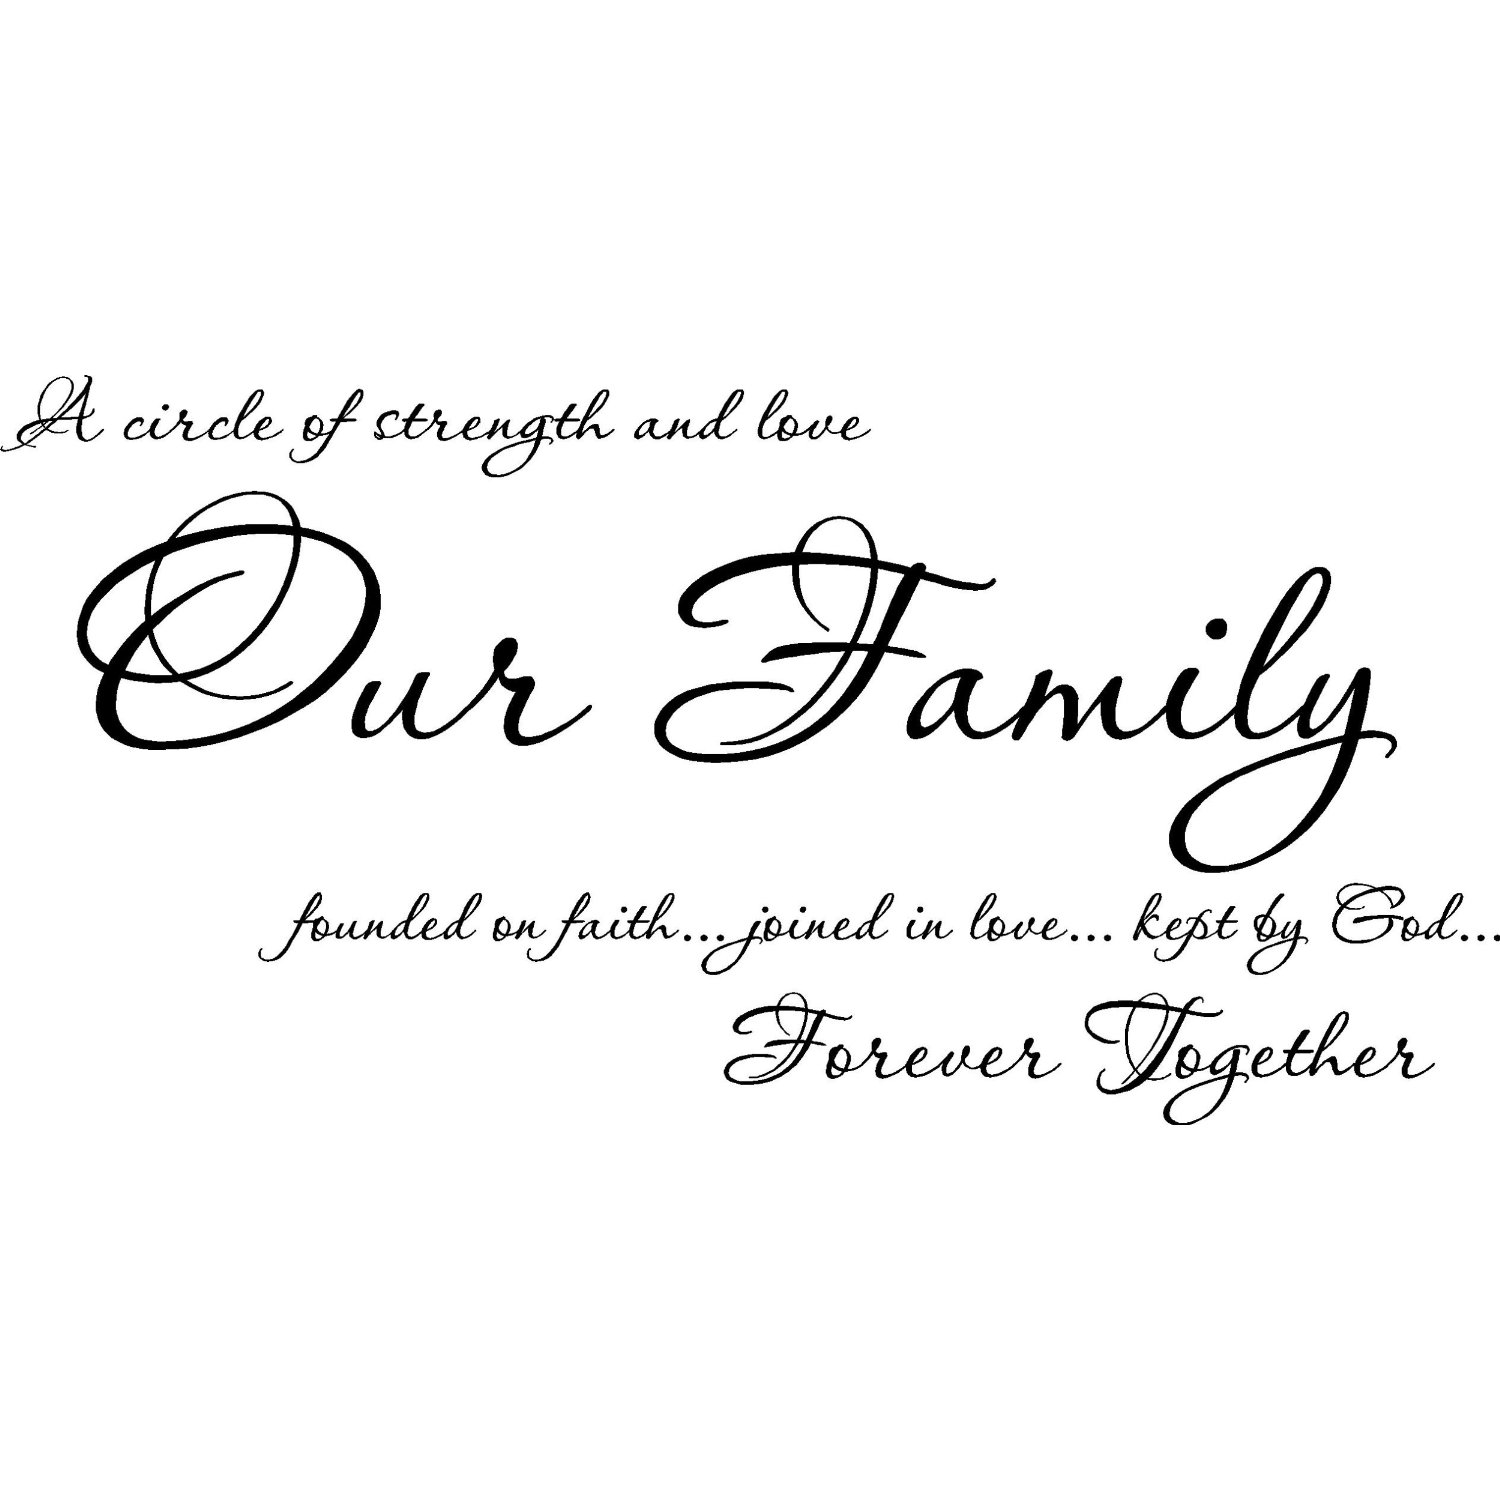  on July 16 2015 By Stephen Comments Off on Family Quotes Wallpapers